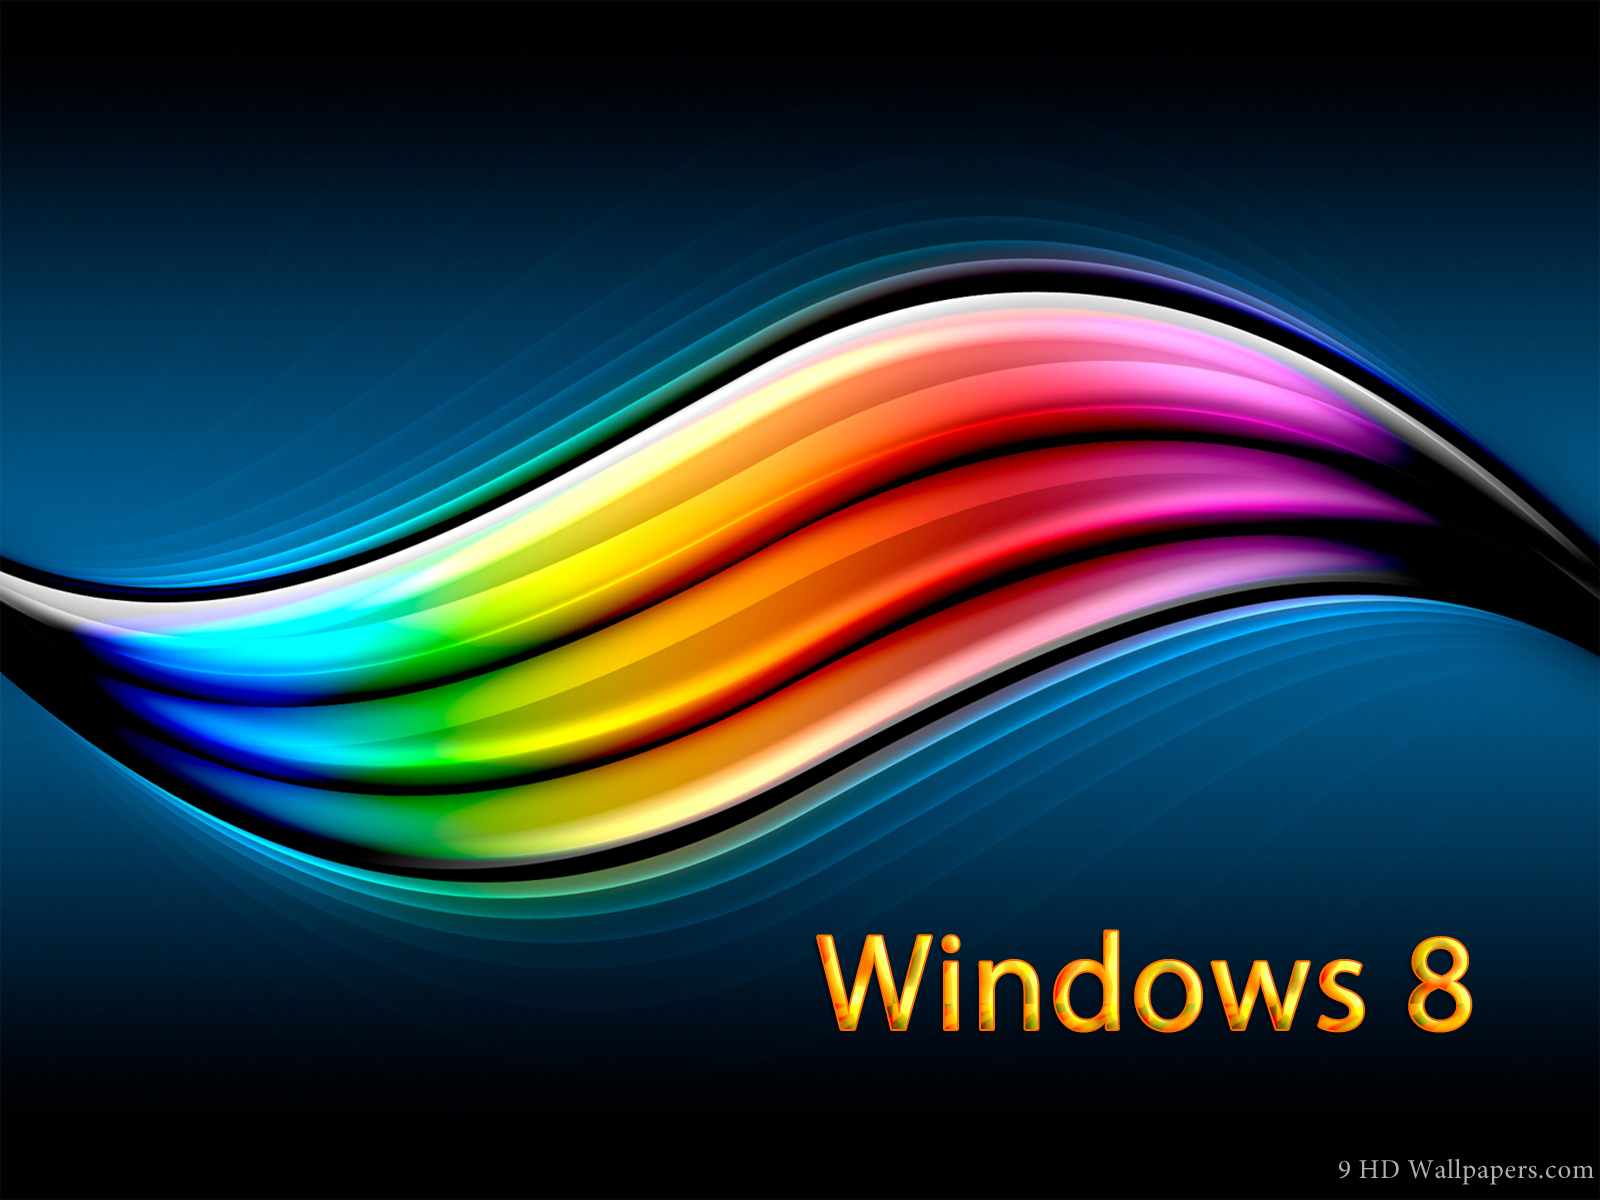 Latest Windows 8 Backgrounds and Wallpapers | New Windows 8 ...